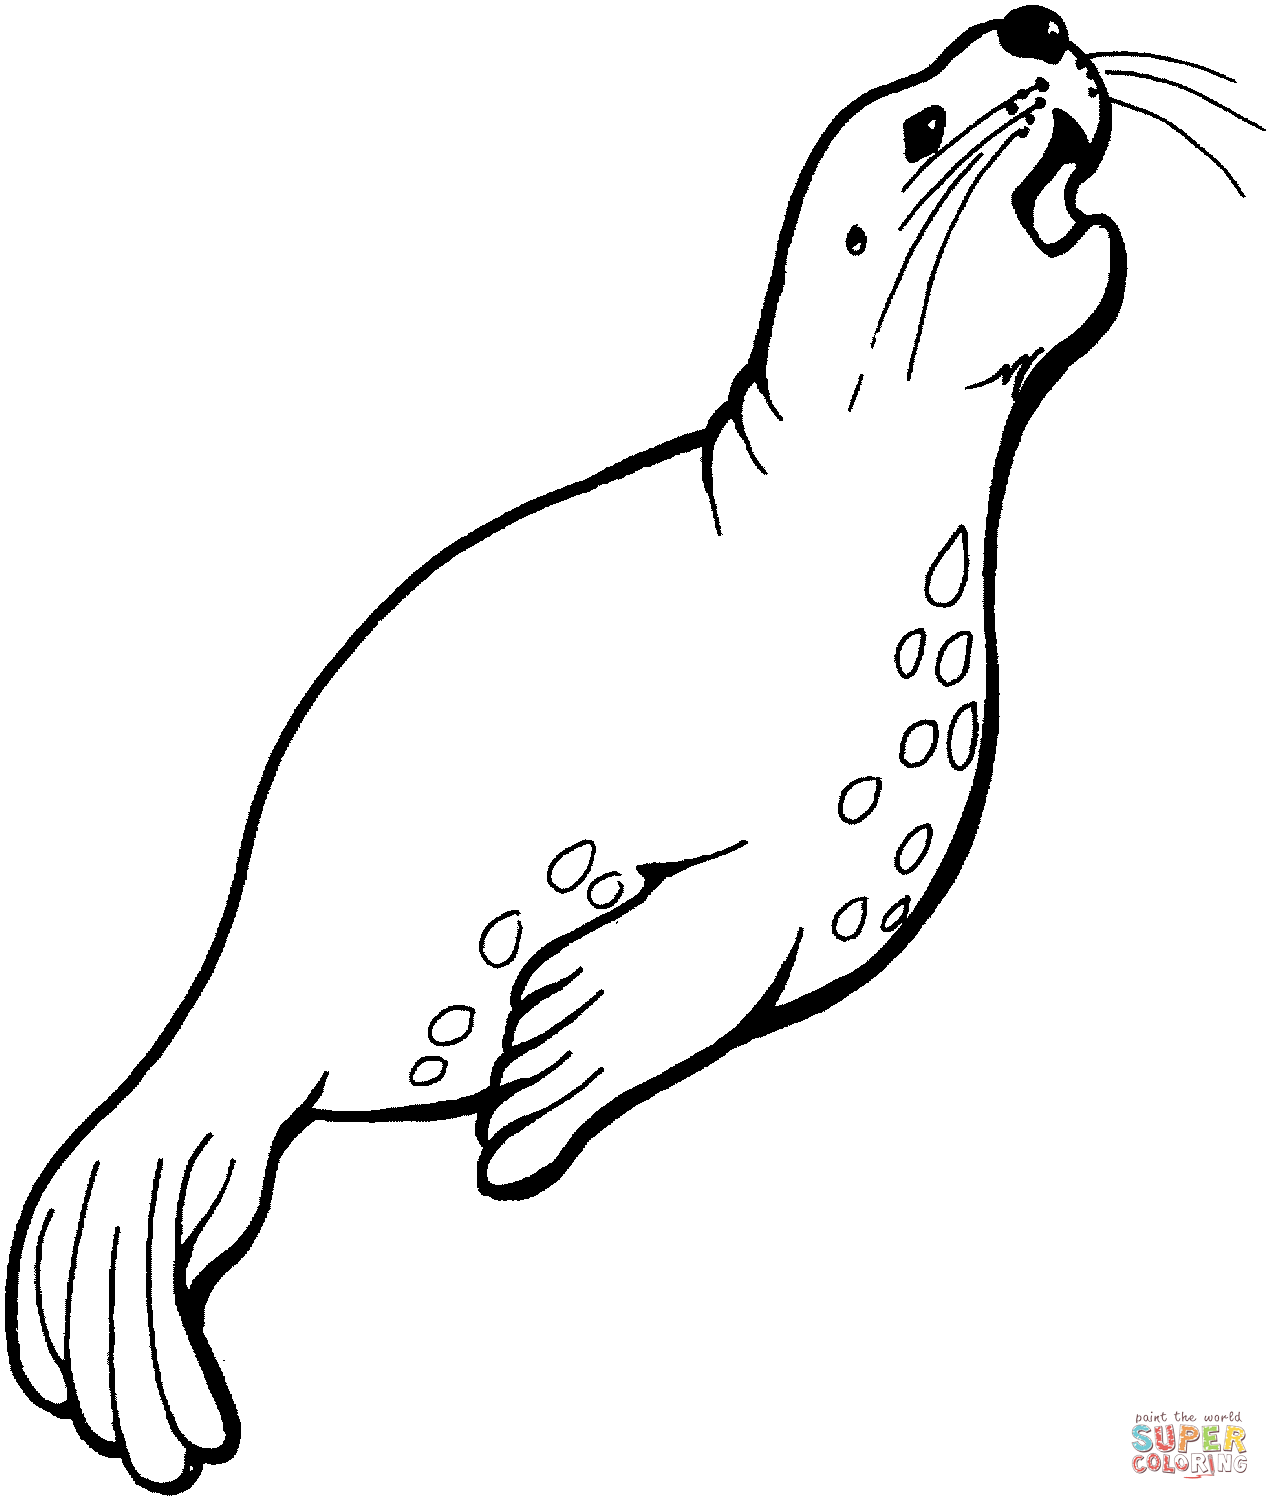 Sea lion is singing coloring page free printable coloring pages